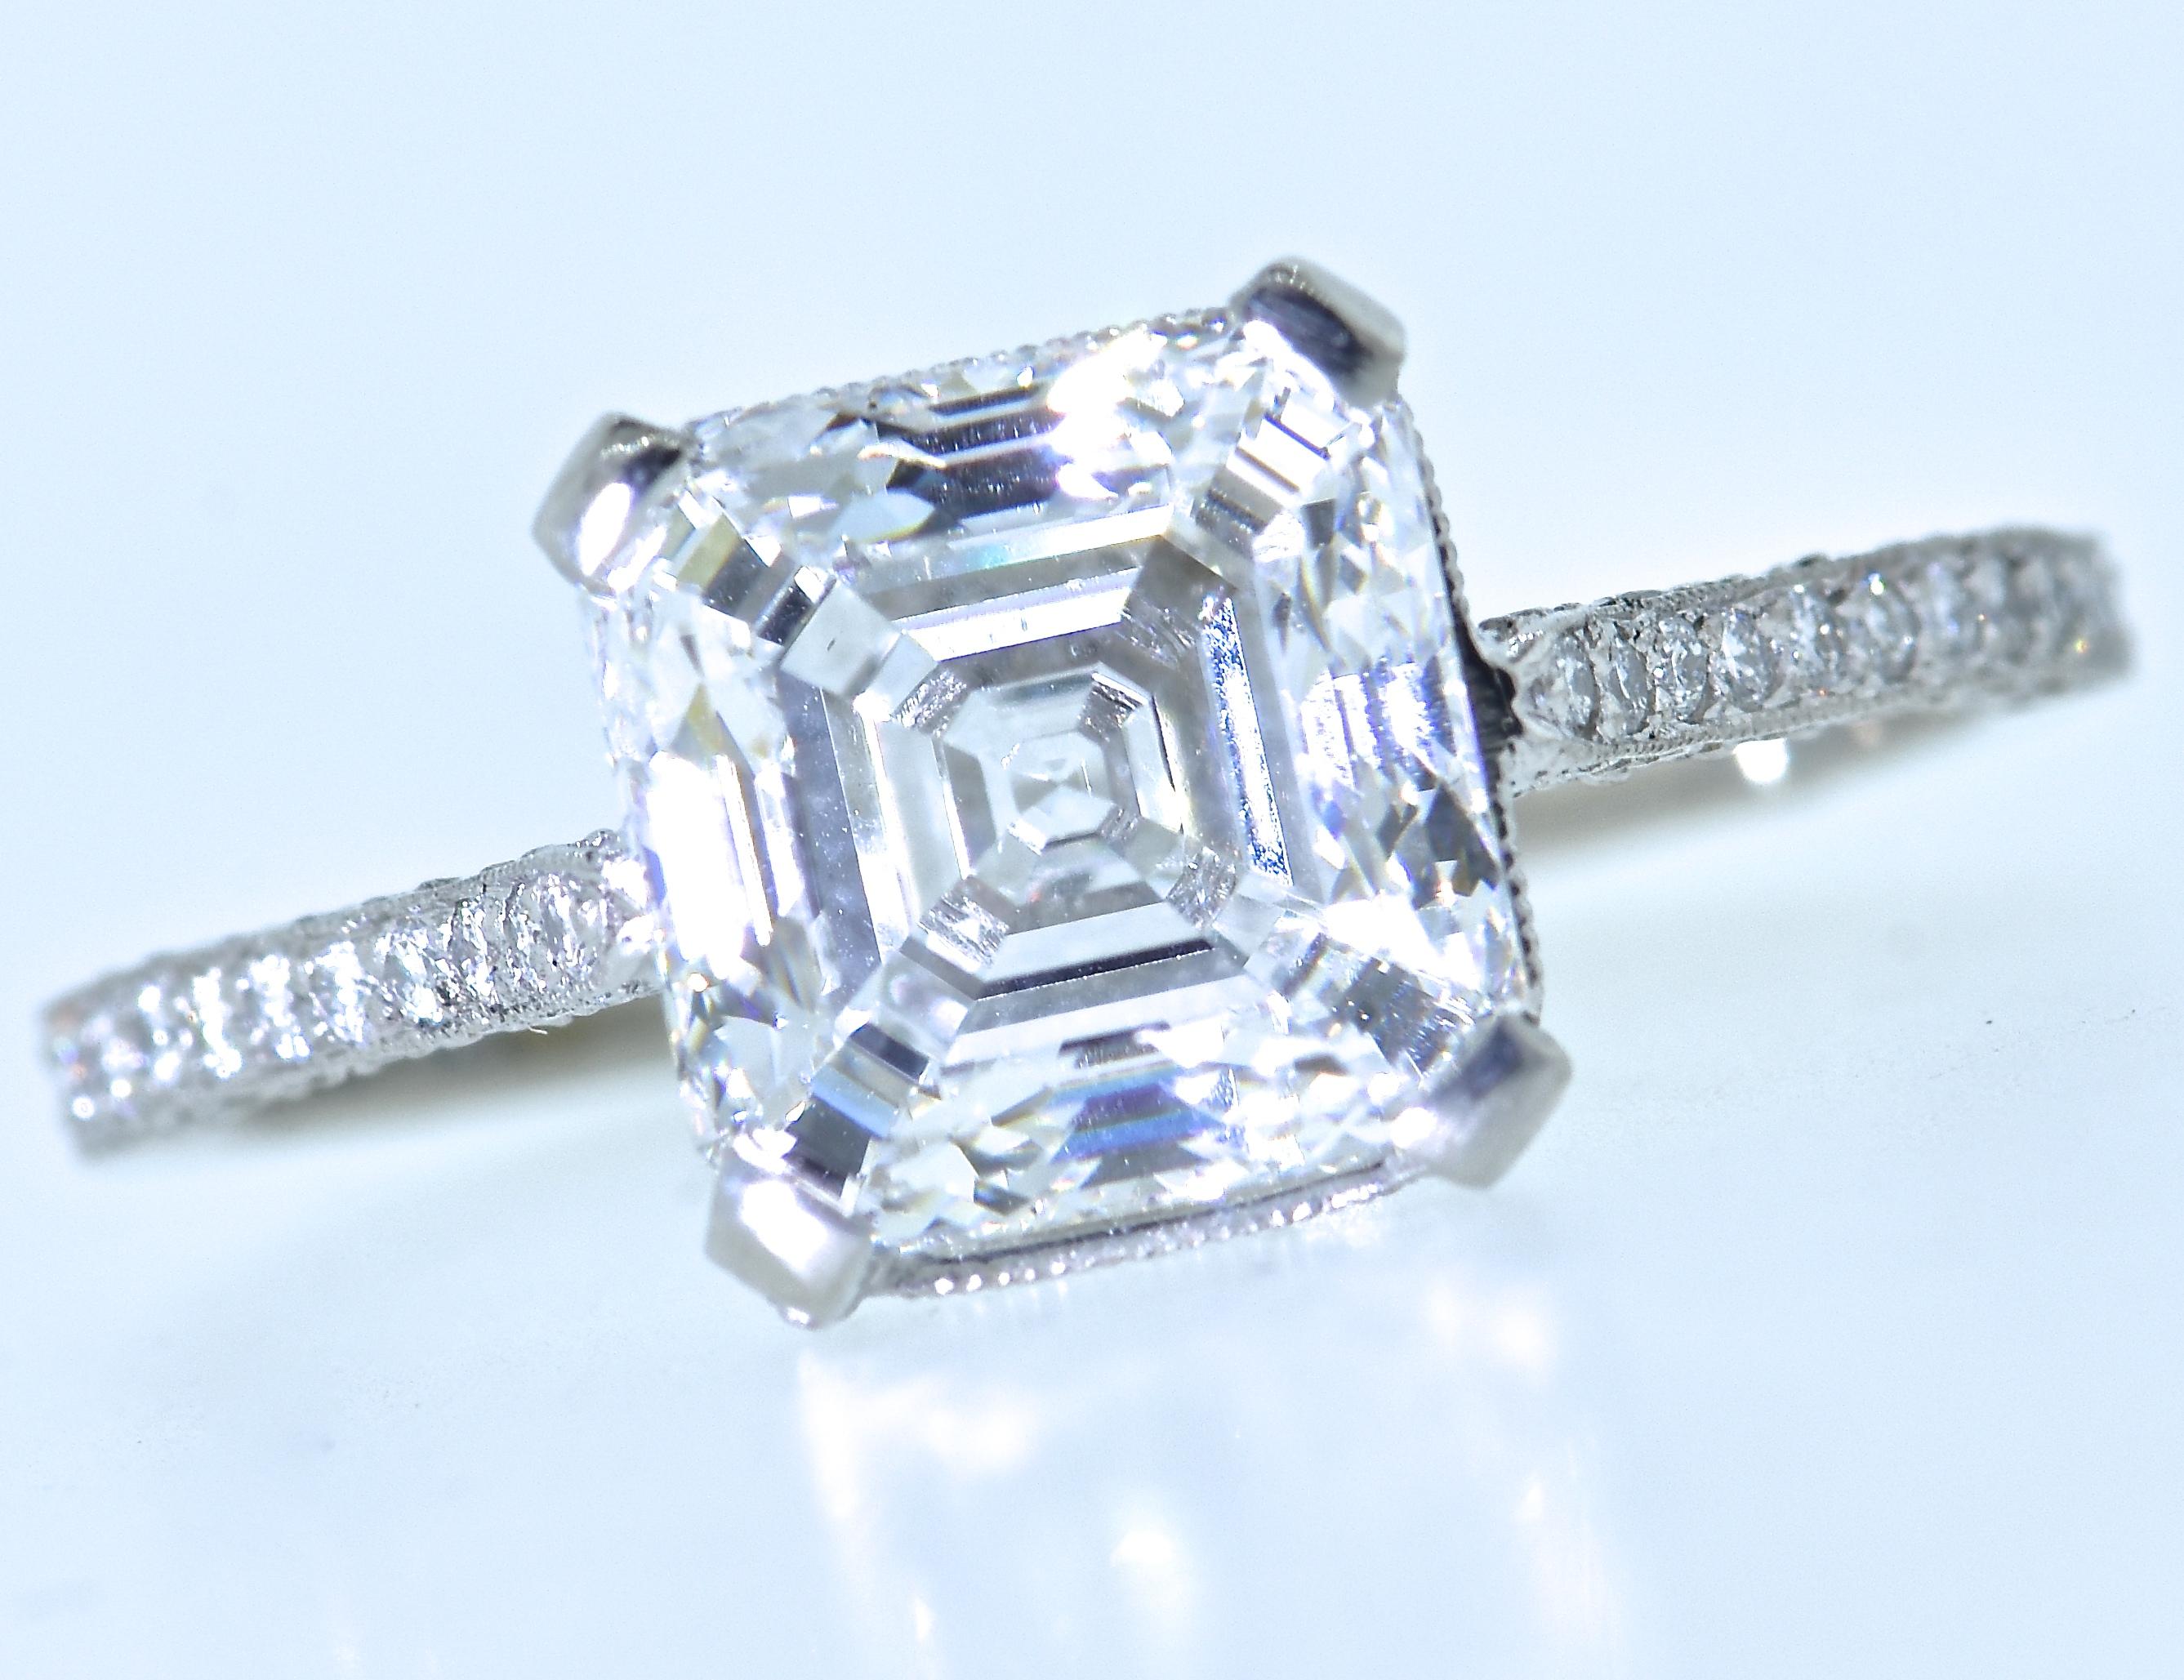 Pierre/Famille has hand made a fine micro pave platinum ring centering a  - recent -GIA graded Asscher cut diamond weighing 3.01 cts has been examined by the Gemological Institute of American and determined to be G in color (at the highest range of